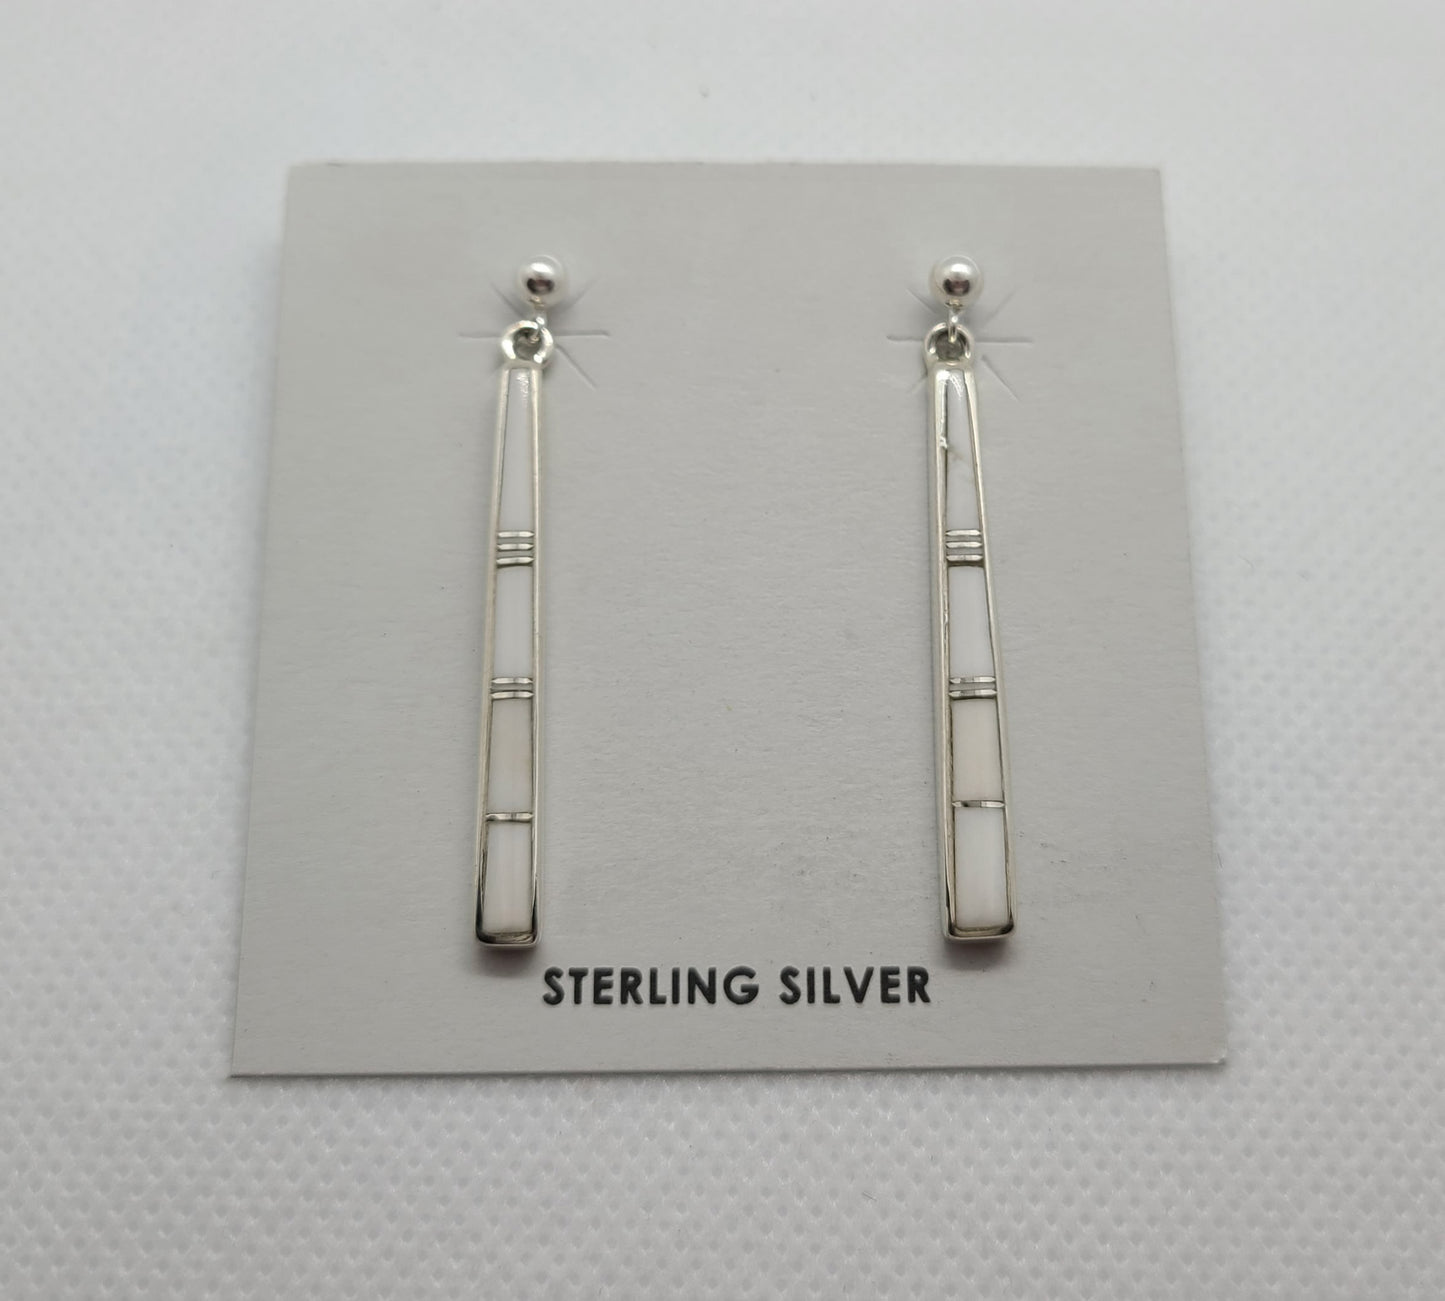 These earrings are stick like, White Buffalo stone inlaid in Sterling Silver with small slivers of silver between the stones.  Mostly pure white with a very small amount of matrix. Approximately 1.5 inches long. Navajo artist Rick Tolino. Comes with Certificate of Authenticity.